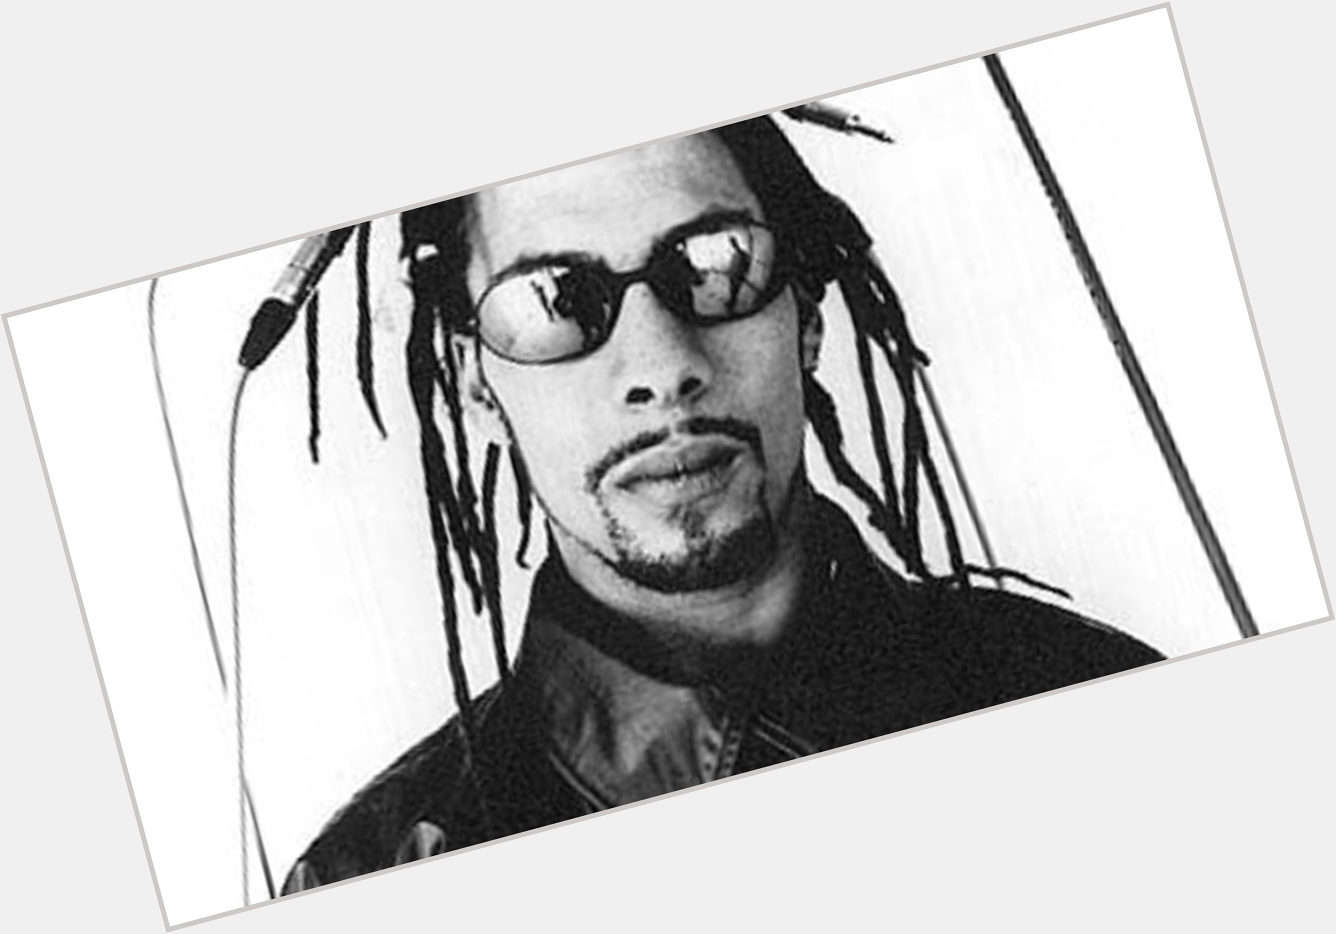 <a href="/hot-men/roni-size/is-he-married-what-doing-now-where-less">Roni Size</a>  